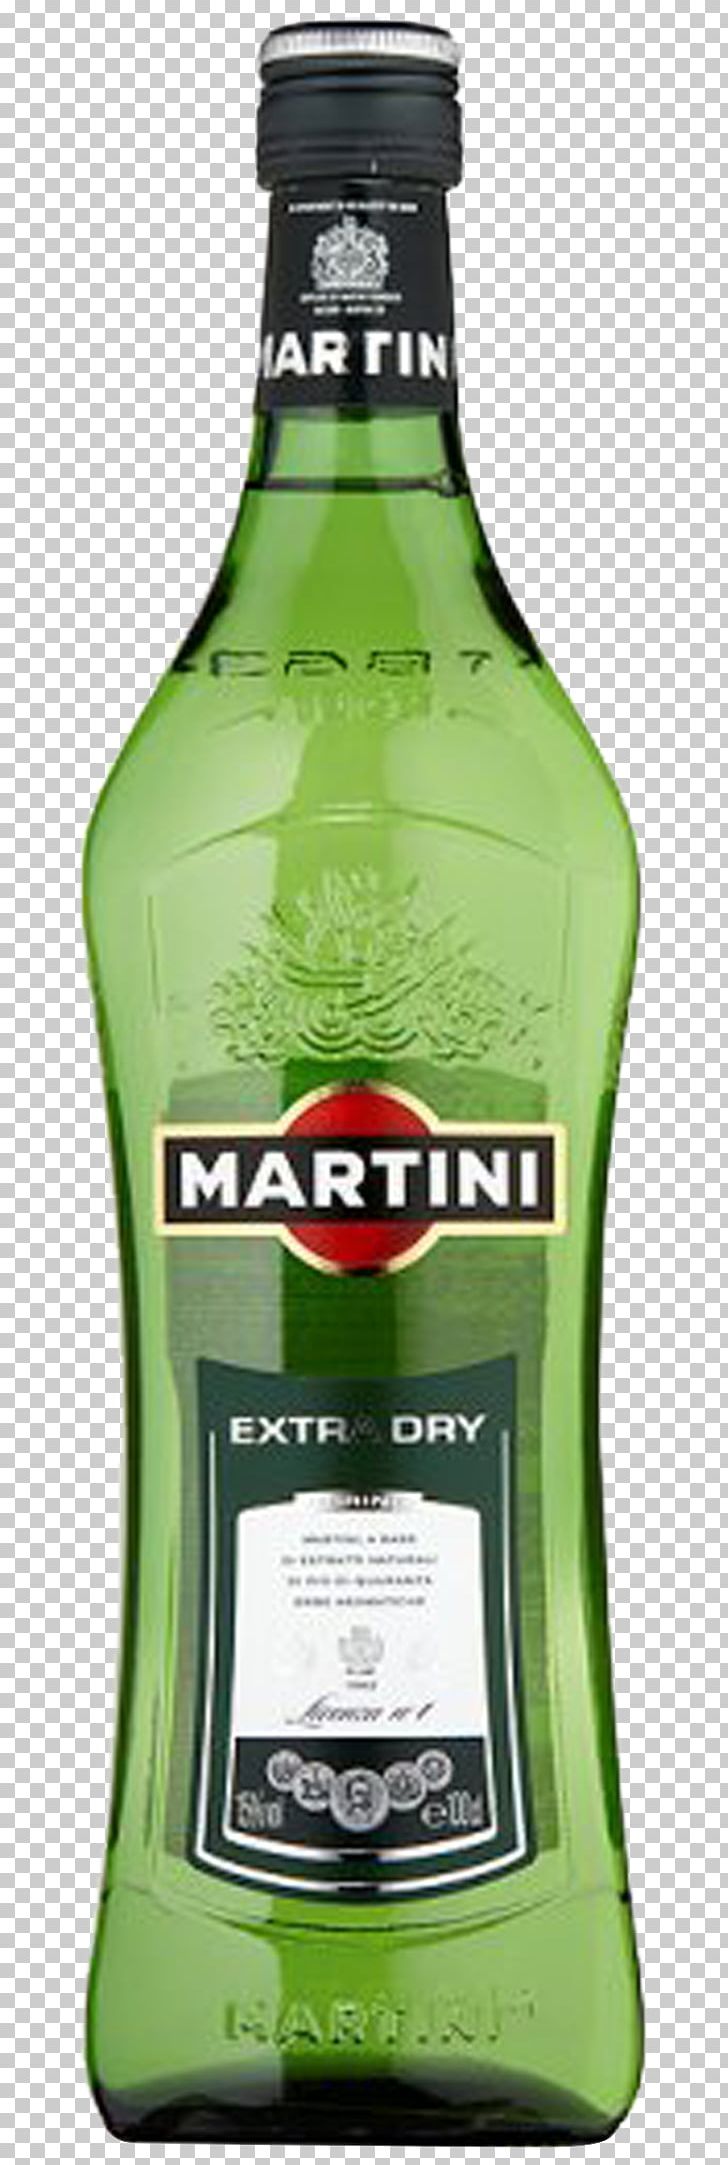 Martini Vermouth Apéritif Distilled Beverage Wine PNG, Clipart, Alcohol, Alcoholic Beverage, Alessandro Martini, Aperitif, Appletini Free PNG Download